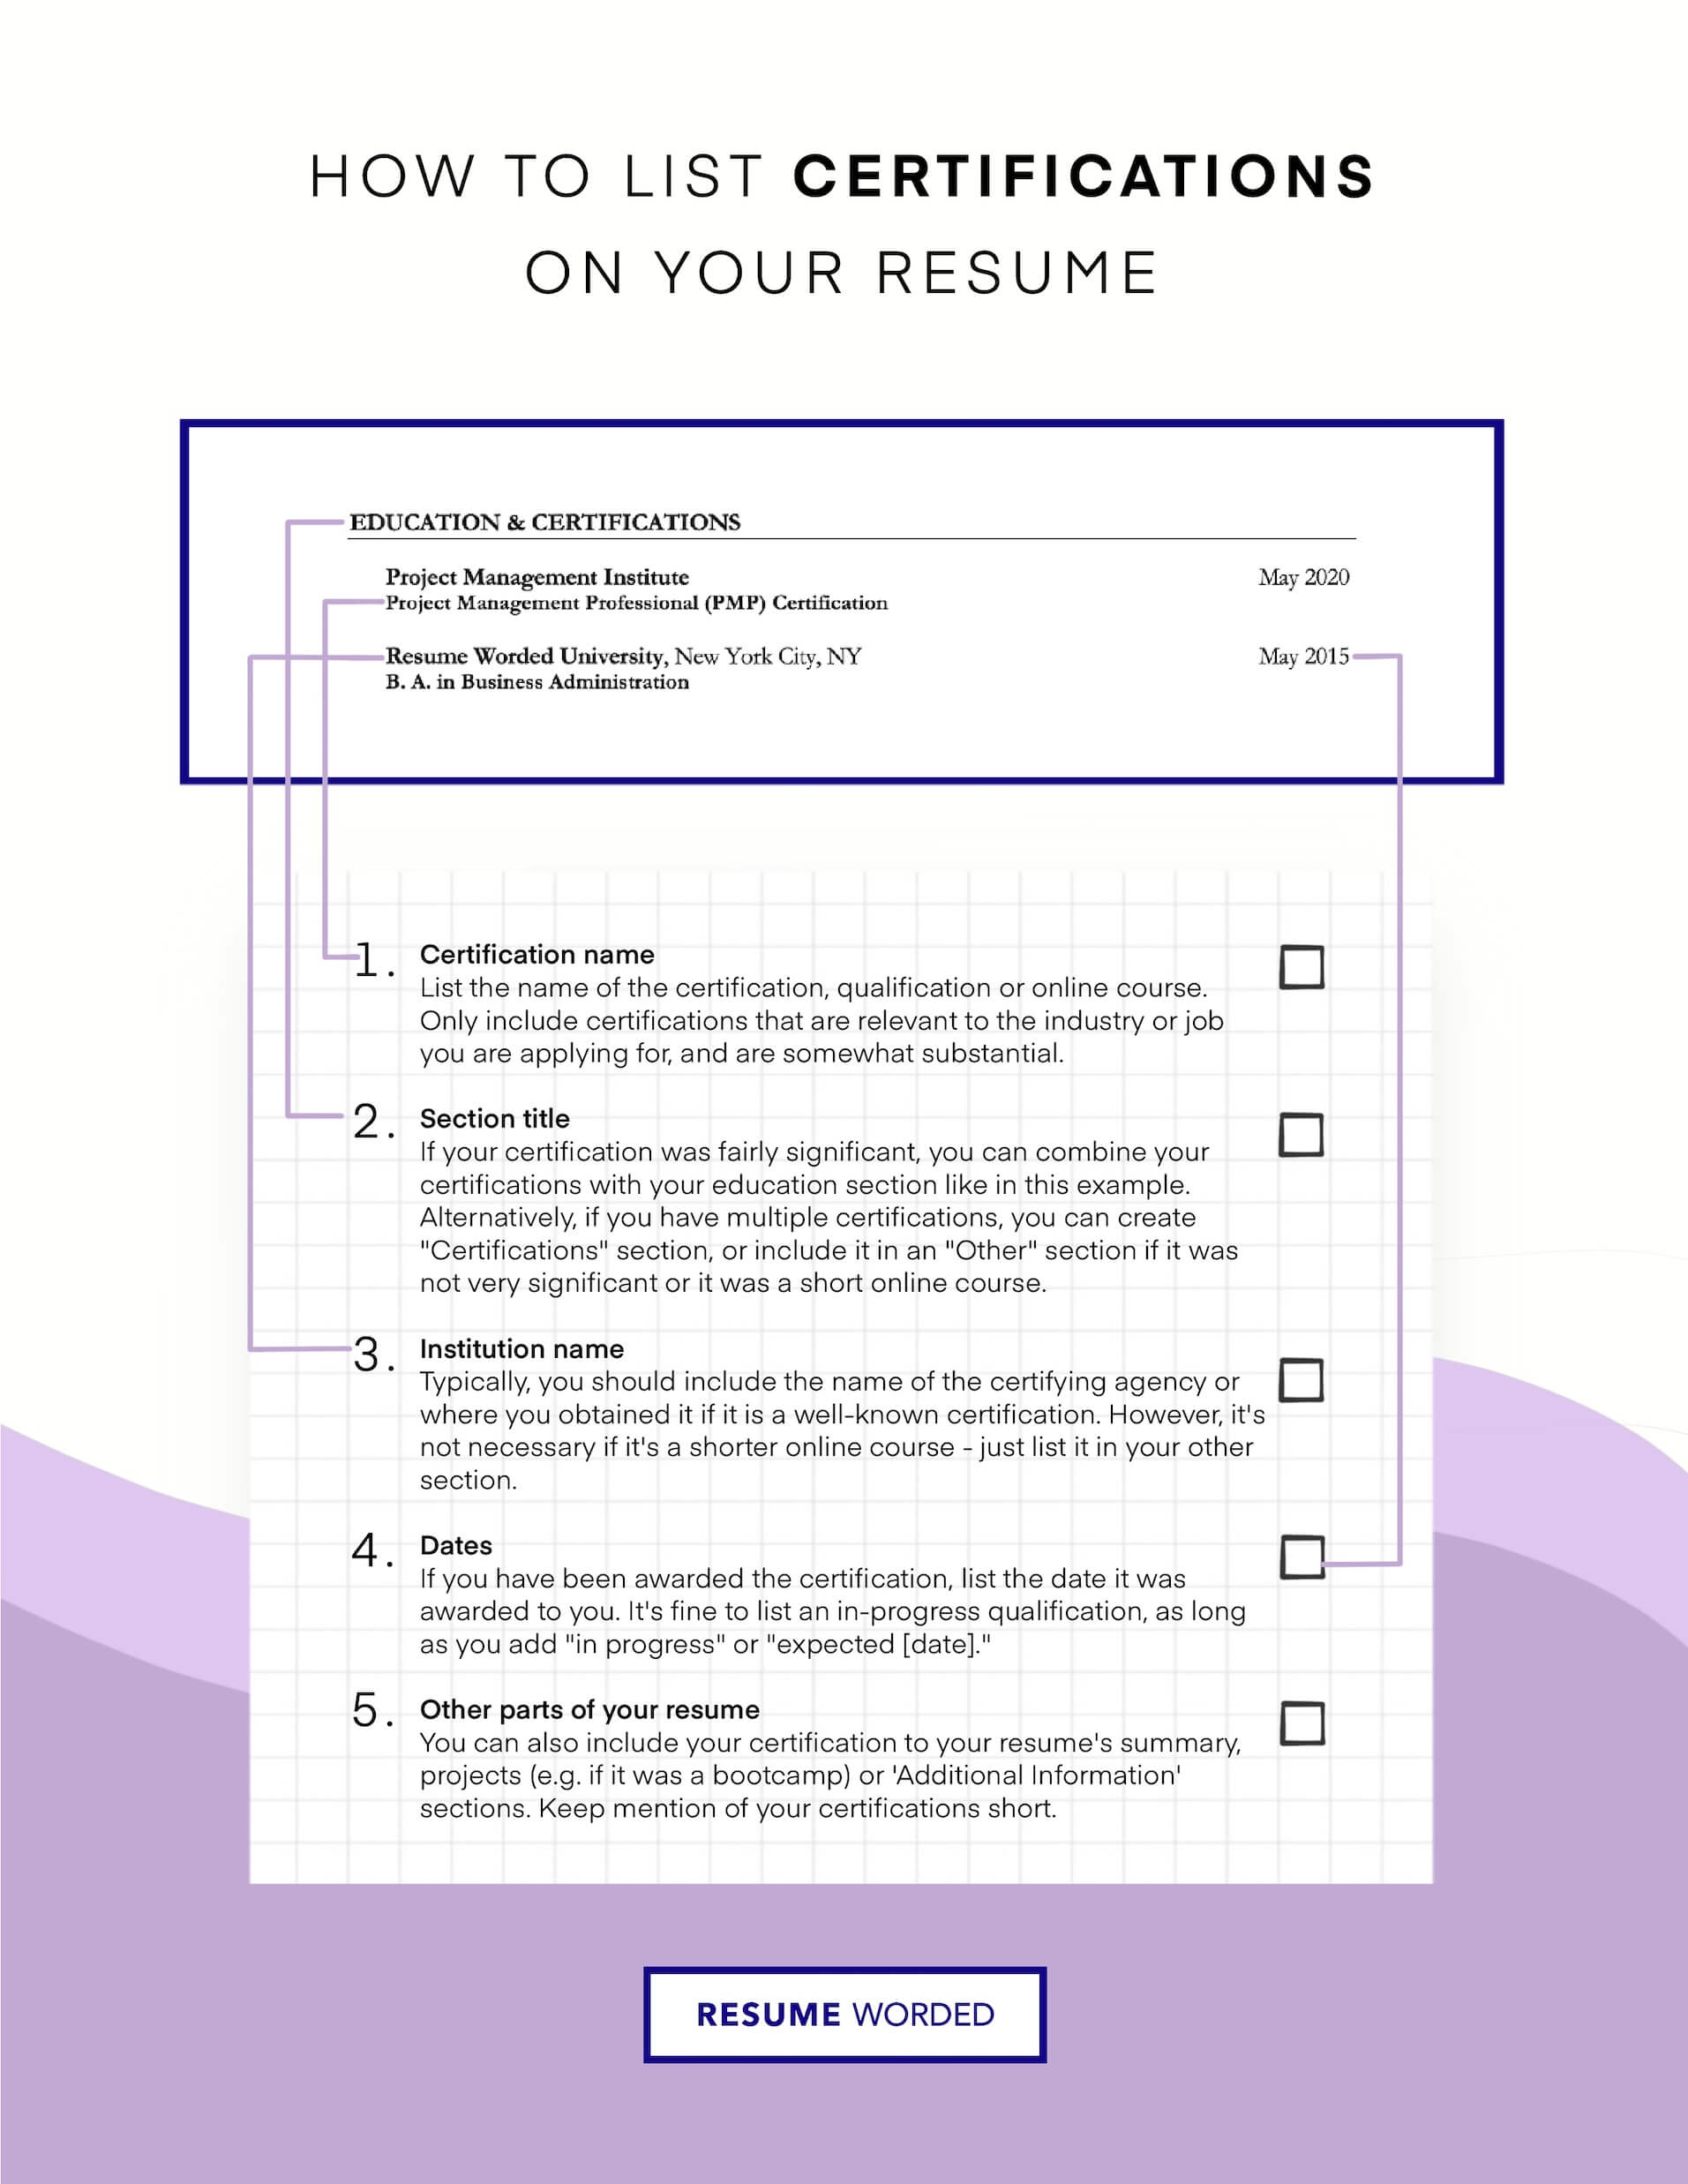 Obtain certifications to strengthen your resume - Financial Analyst Resume